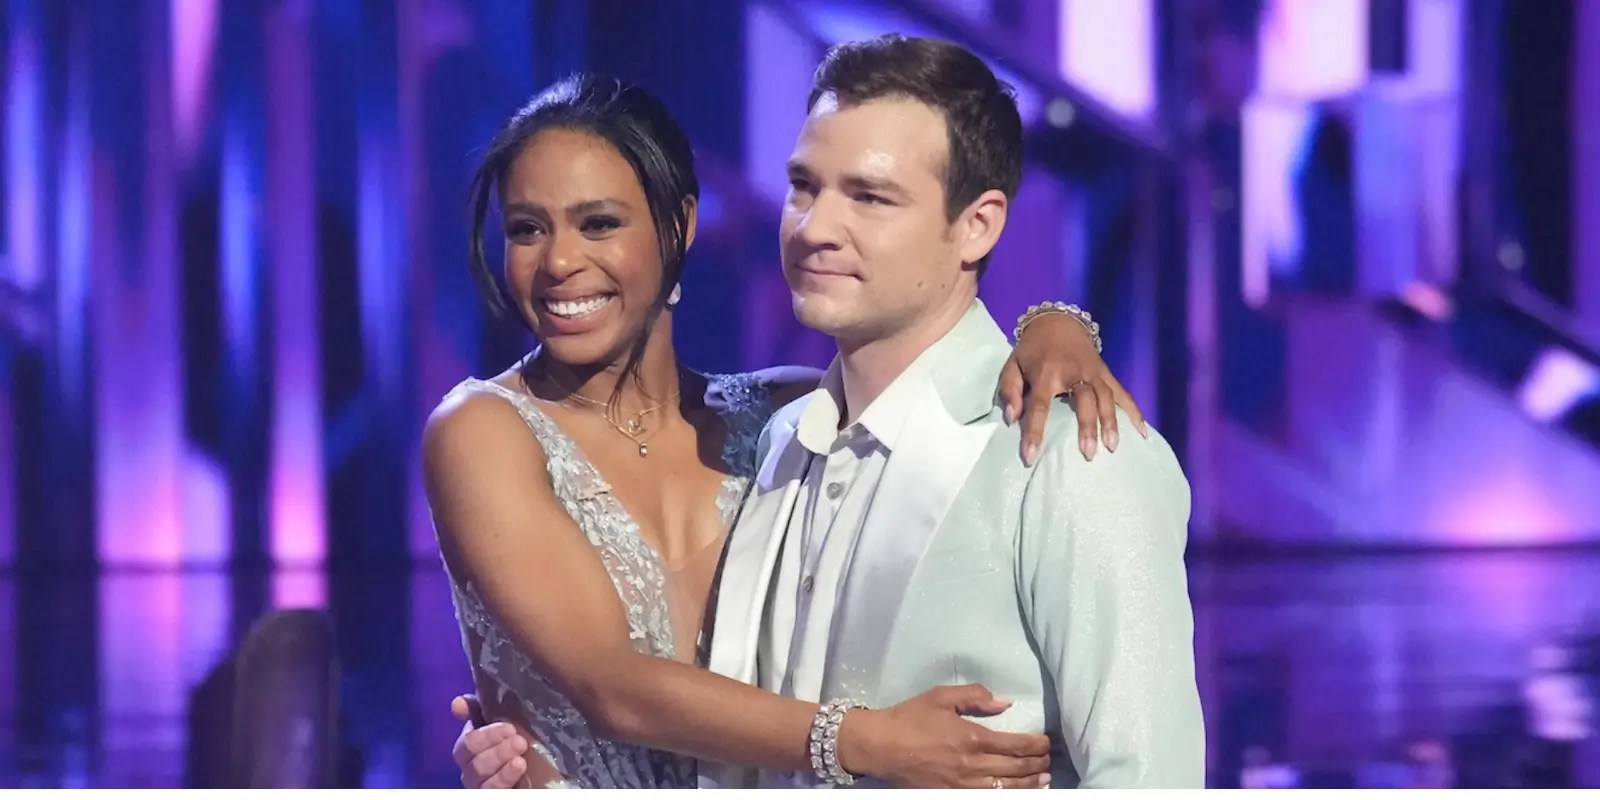 Britt Stewart and Daniel Durant on the set of ABC's 'Dancing with the Stars' season 31.